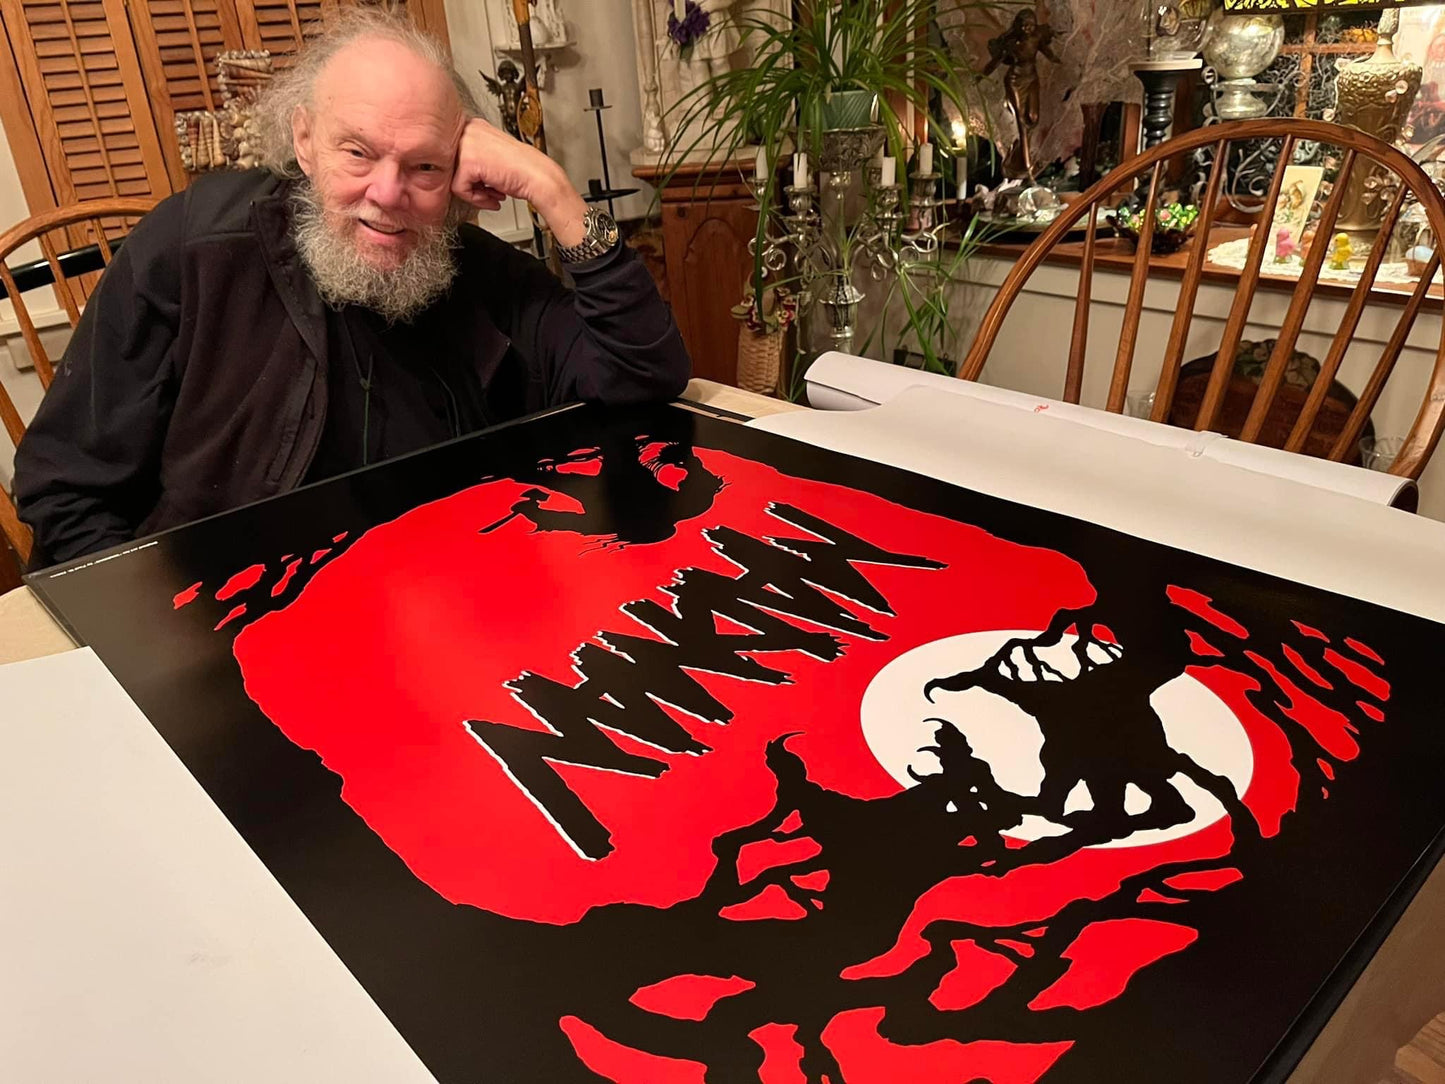 Limited Edition Madman Poster (original key art) illustrated by Paul Ehlers